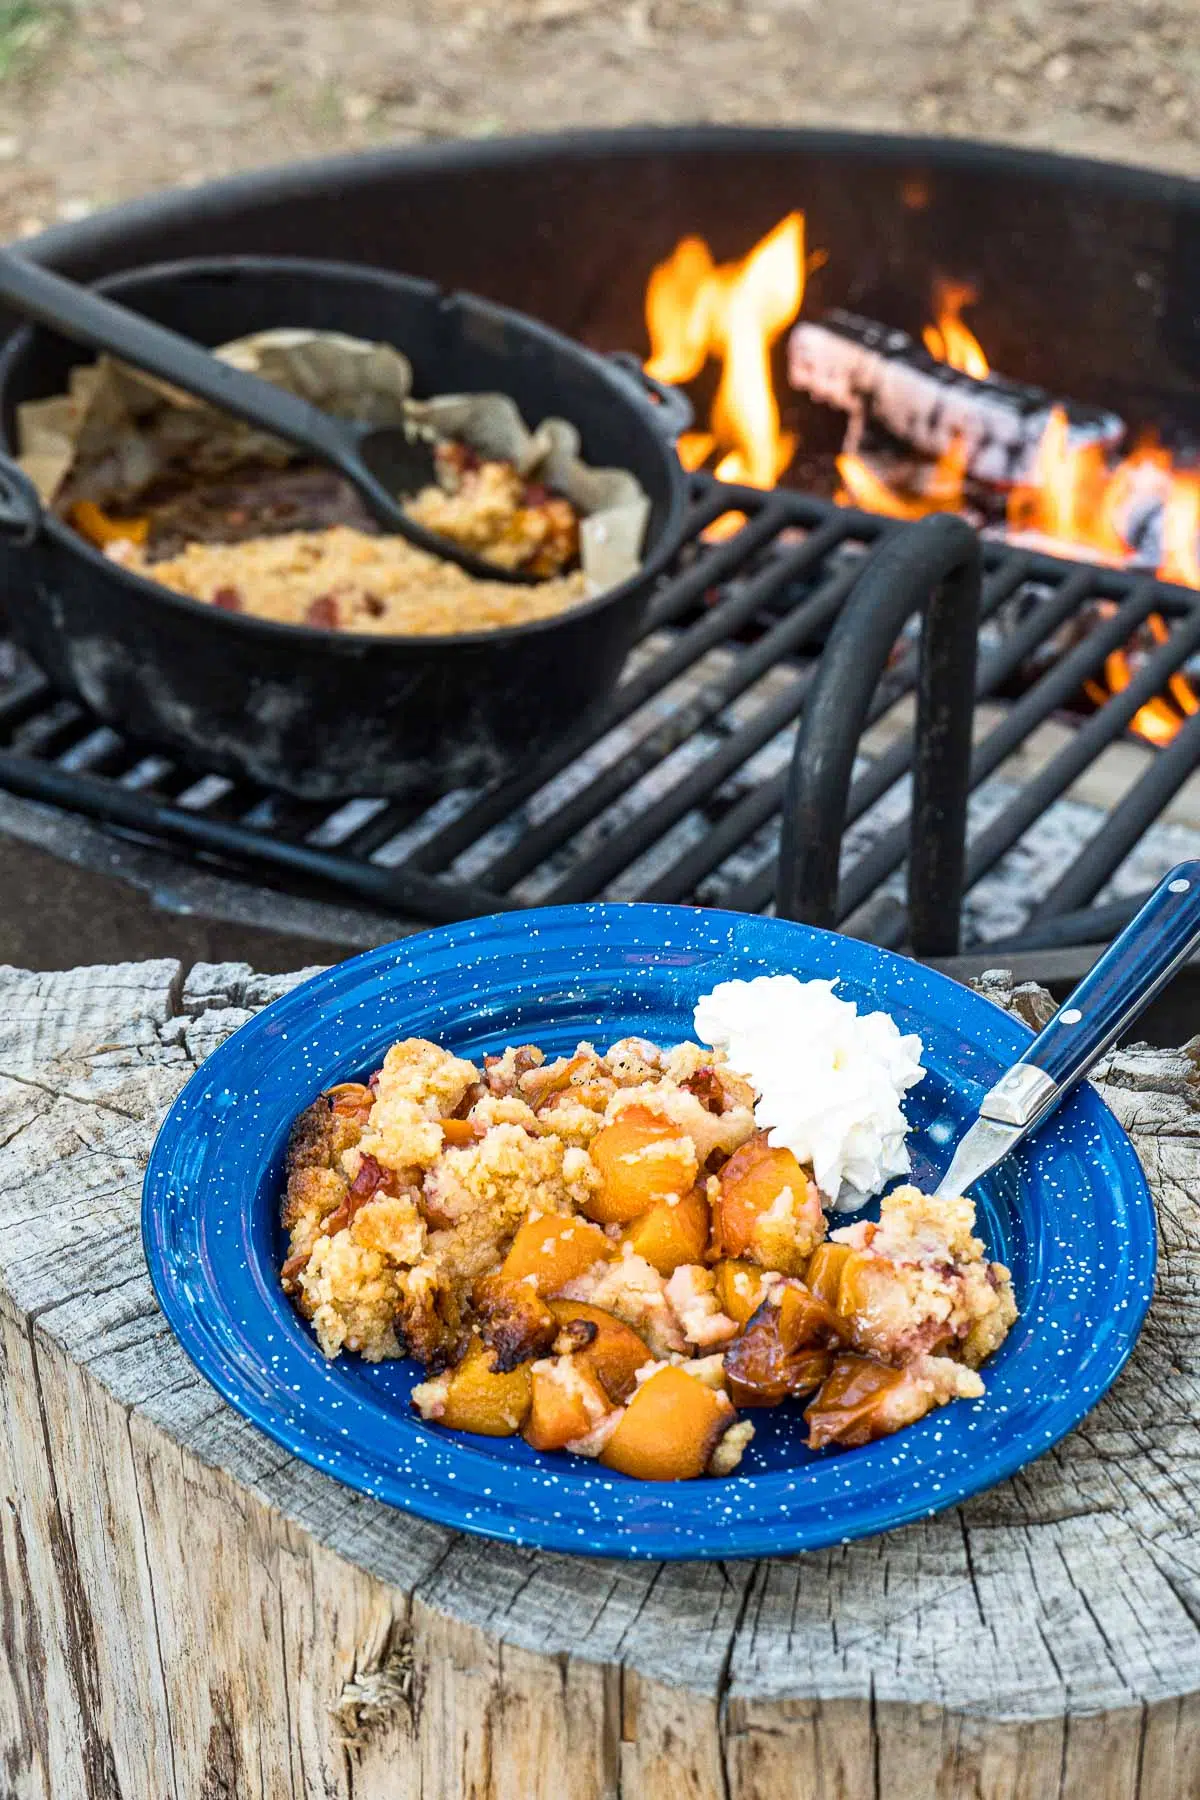 Peach cobbler on plate with bonfire in the background